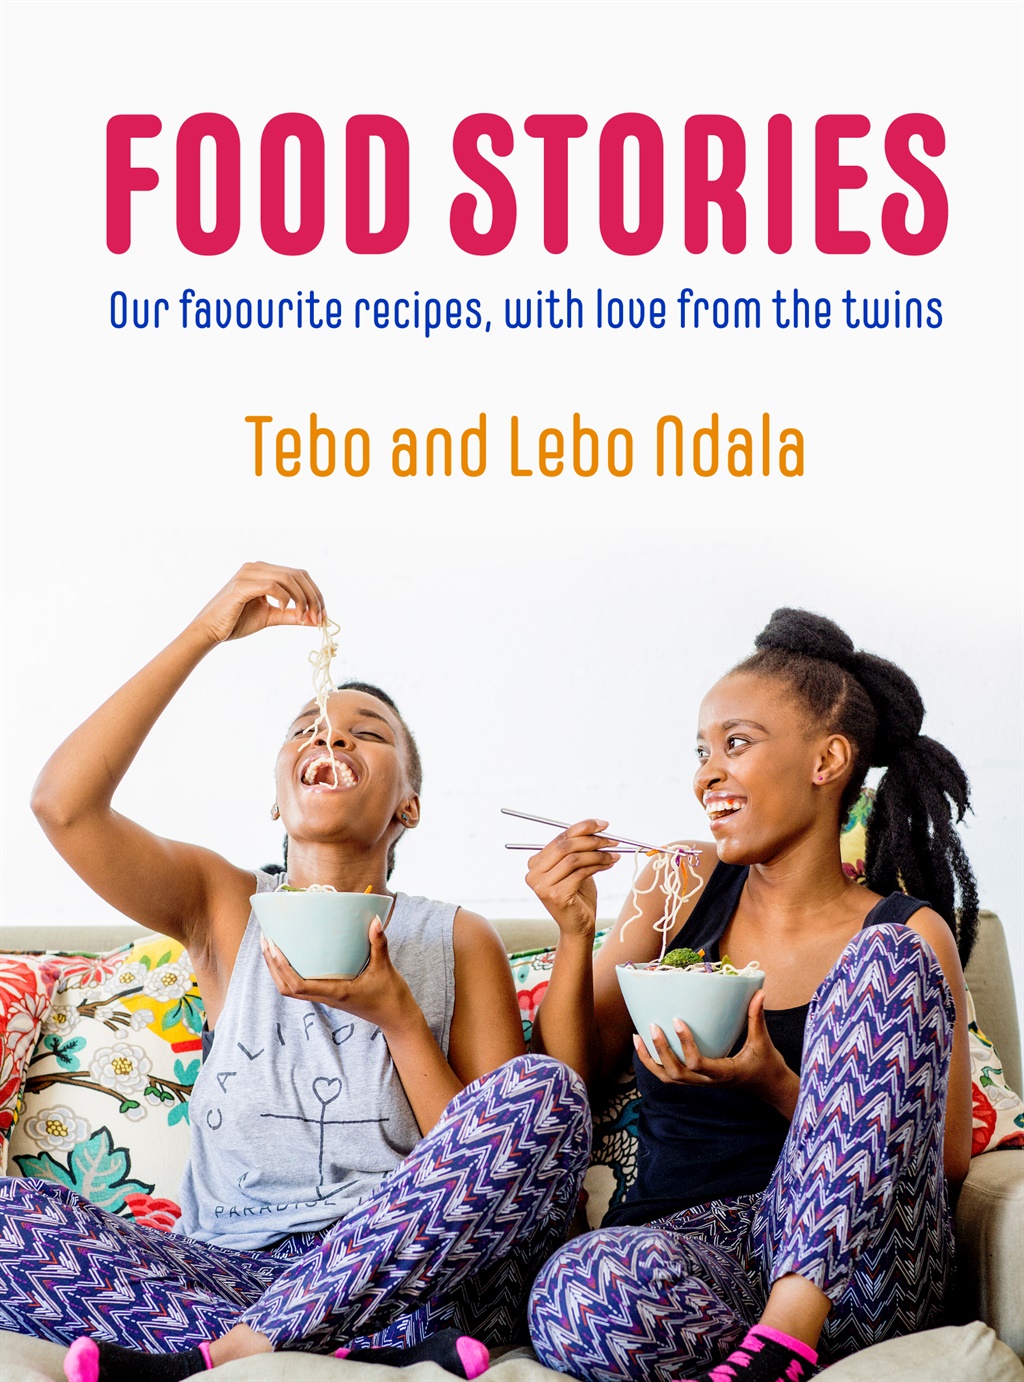 With its Instagram-friendly and uncomplicated recipes, twins Tebo and Lebo Mdala’s first cookbook is a perfect purchase for young people.